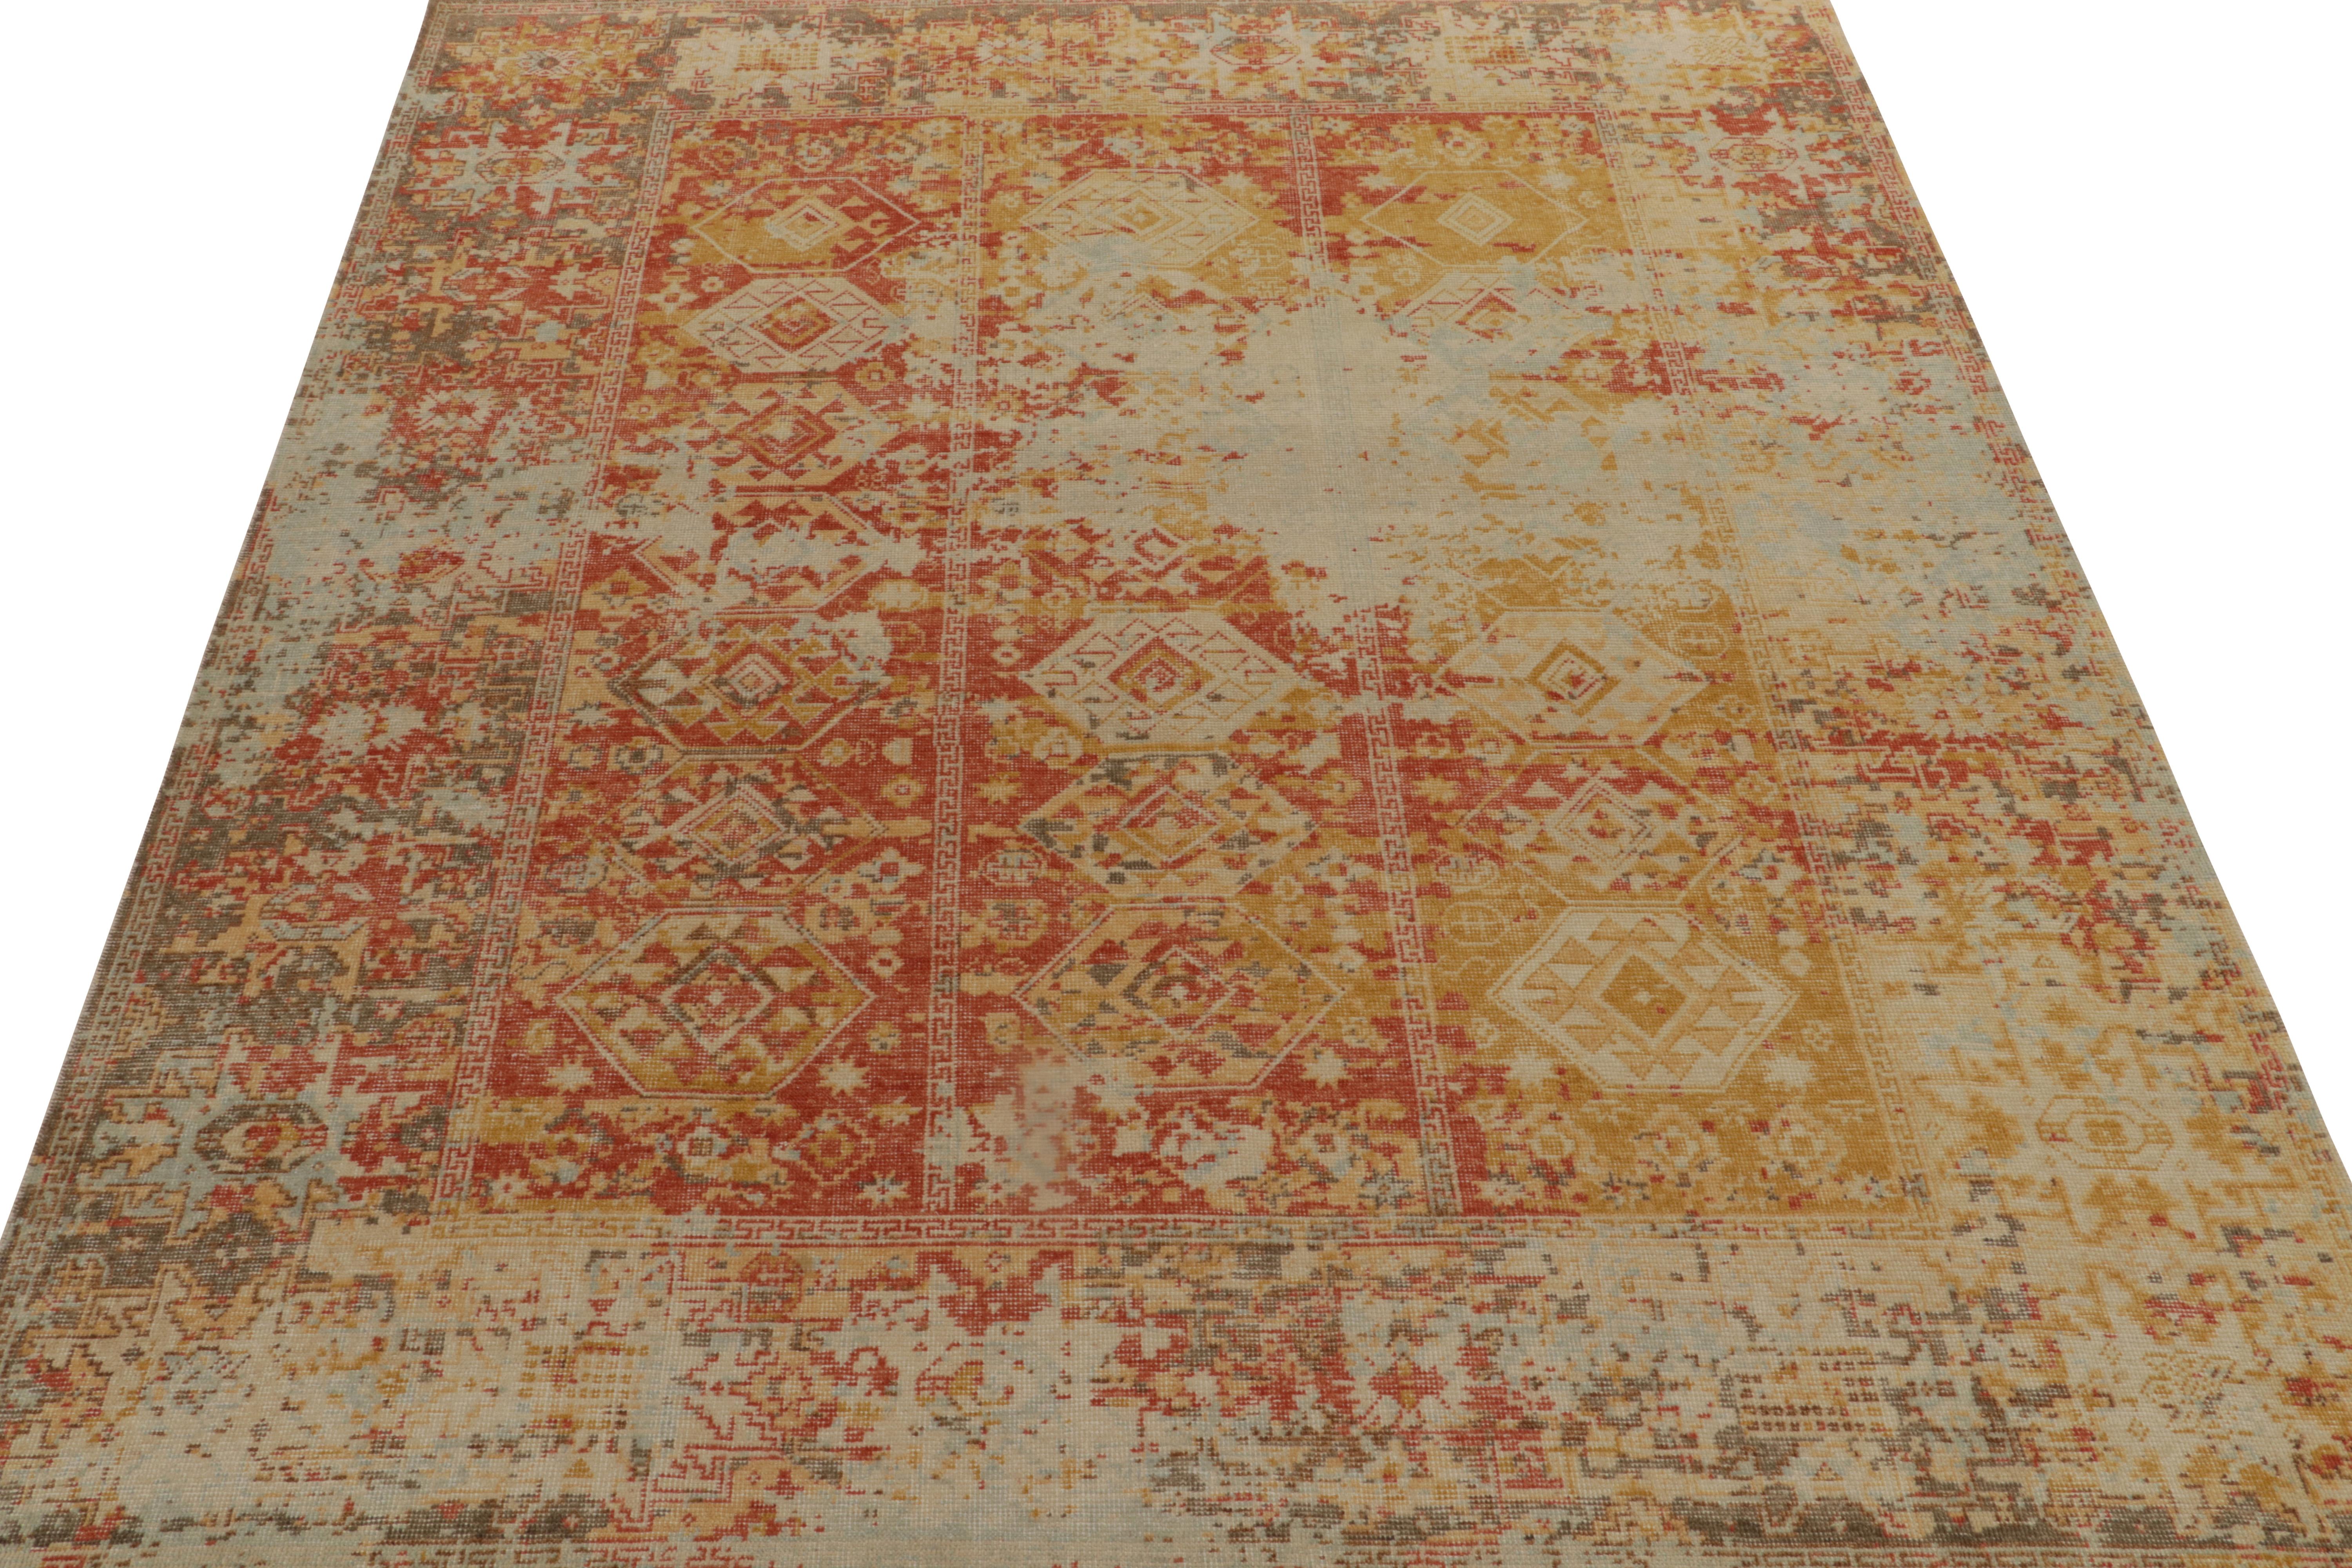 Indian Rug & Kilim’s Distressed Style Rug in Red, Gold and Blue Tribal Patterns For Sale